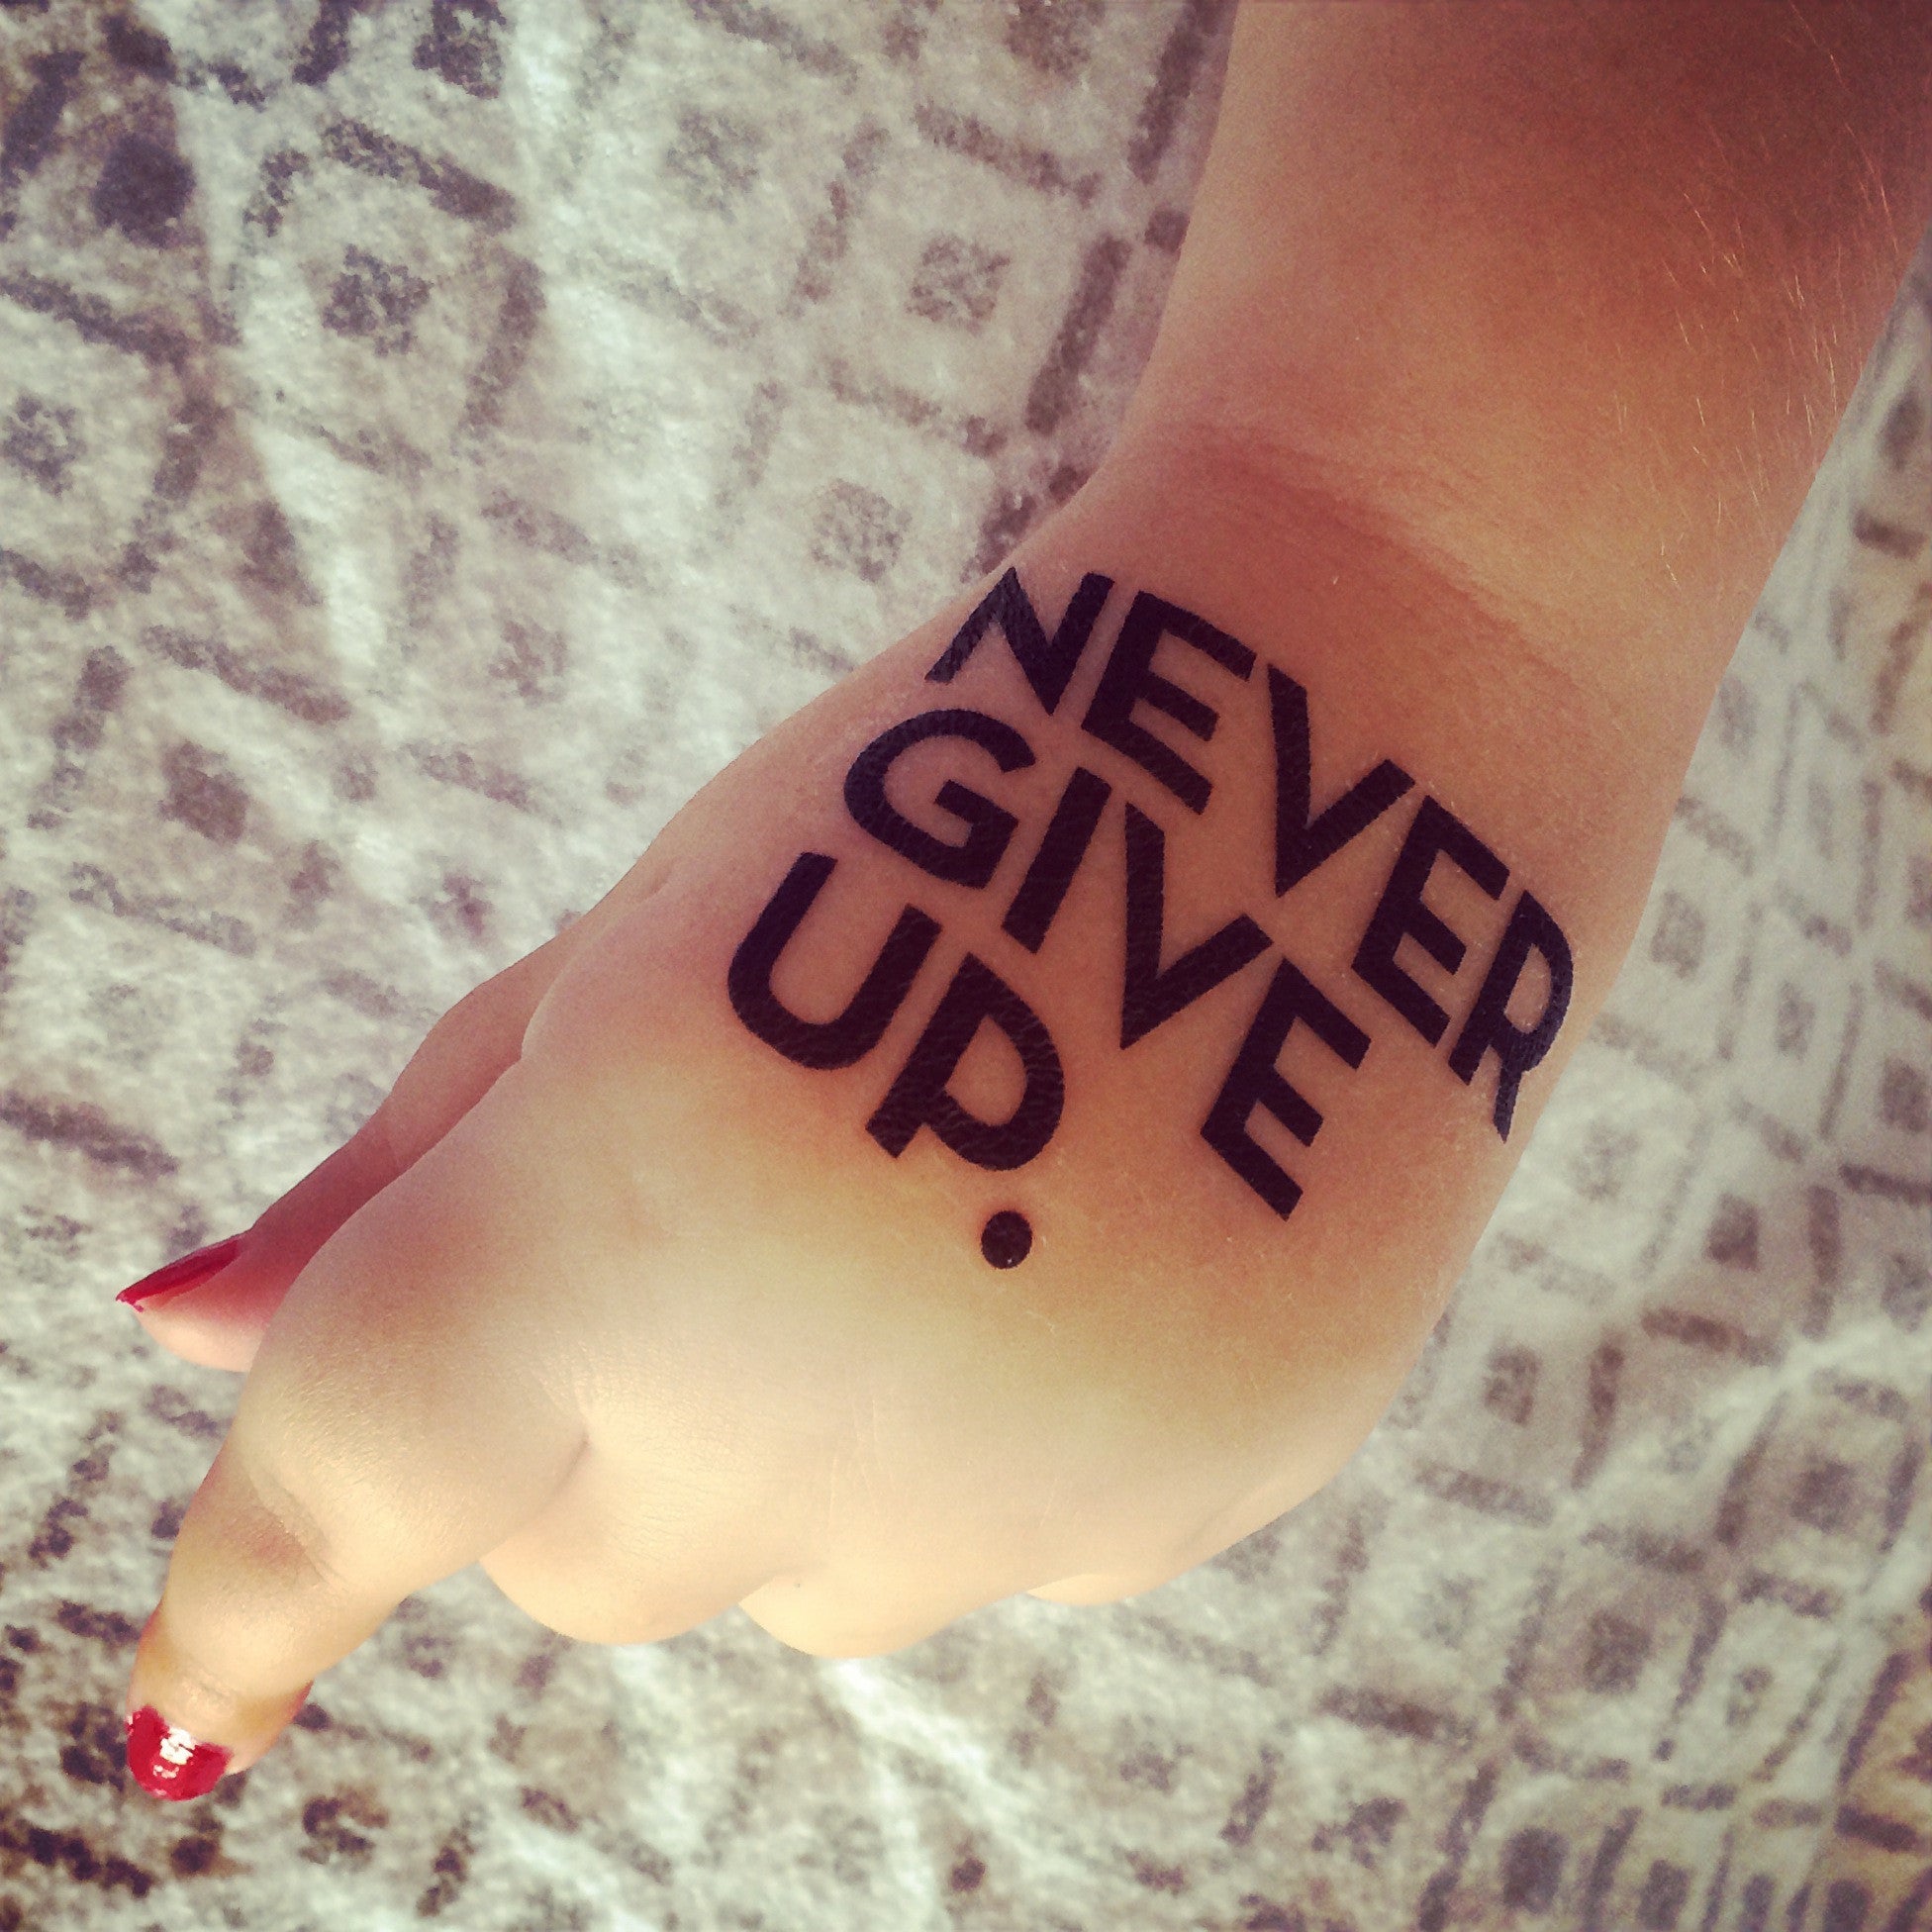 TEMPORARY TATTOOS (PACK OF 10) - NEVER GIVE UP. SHOP